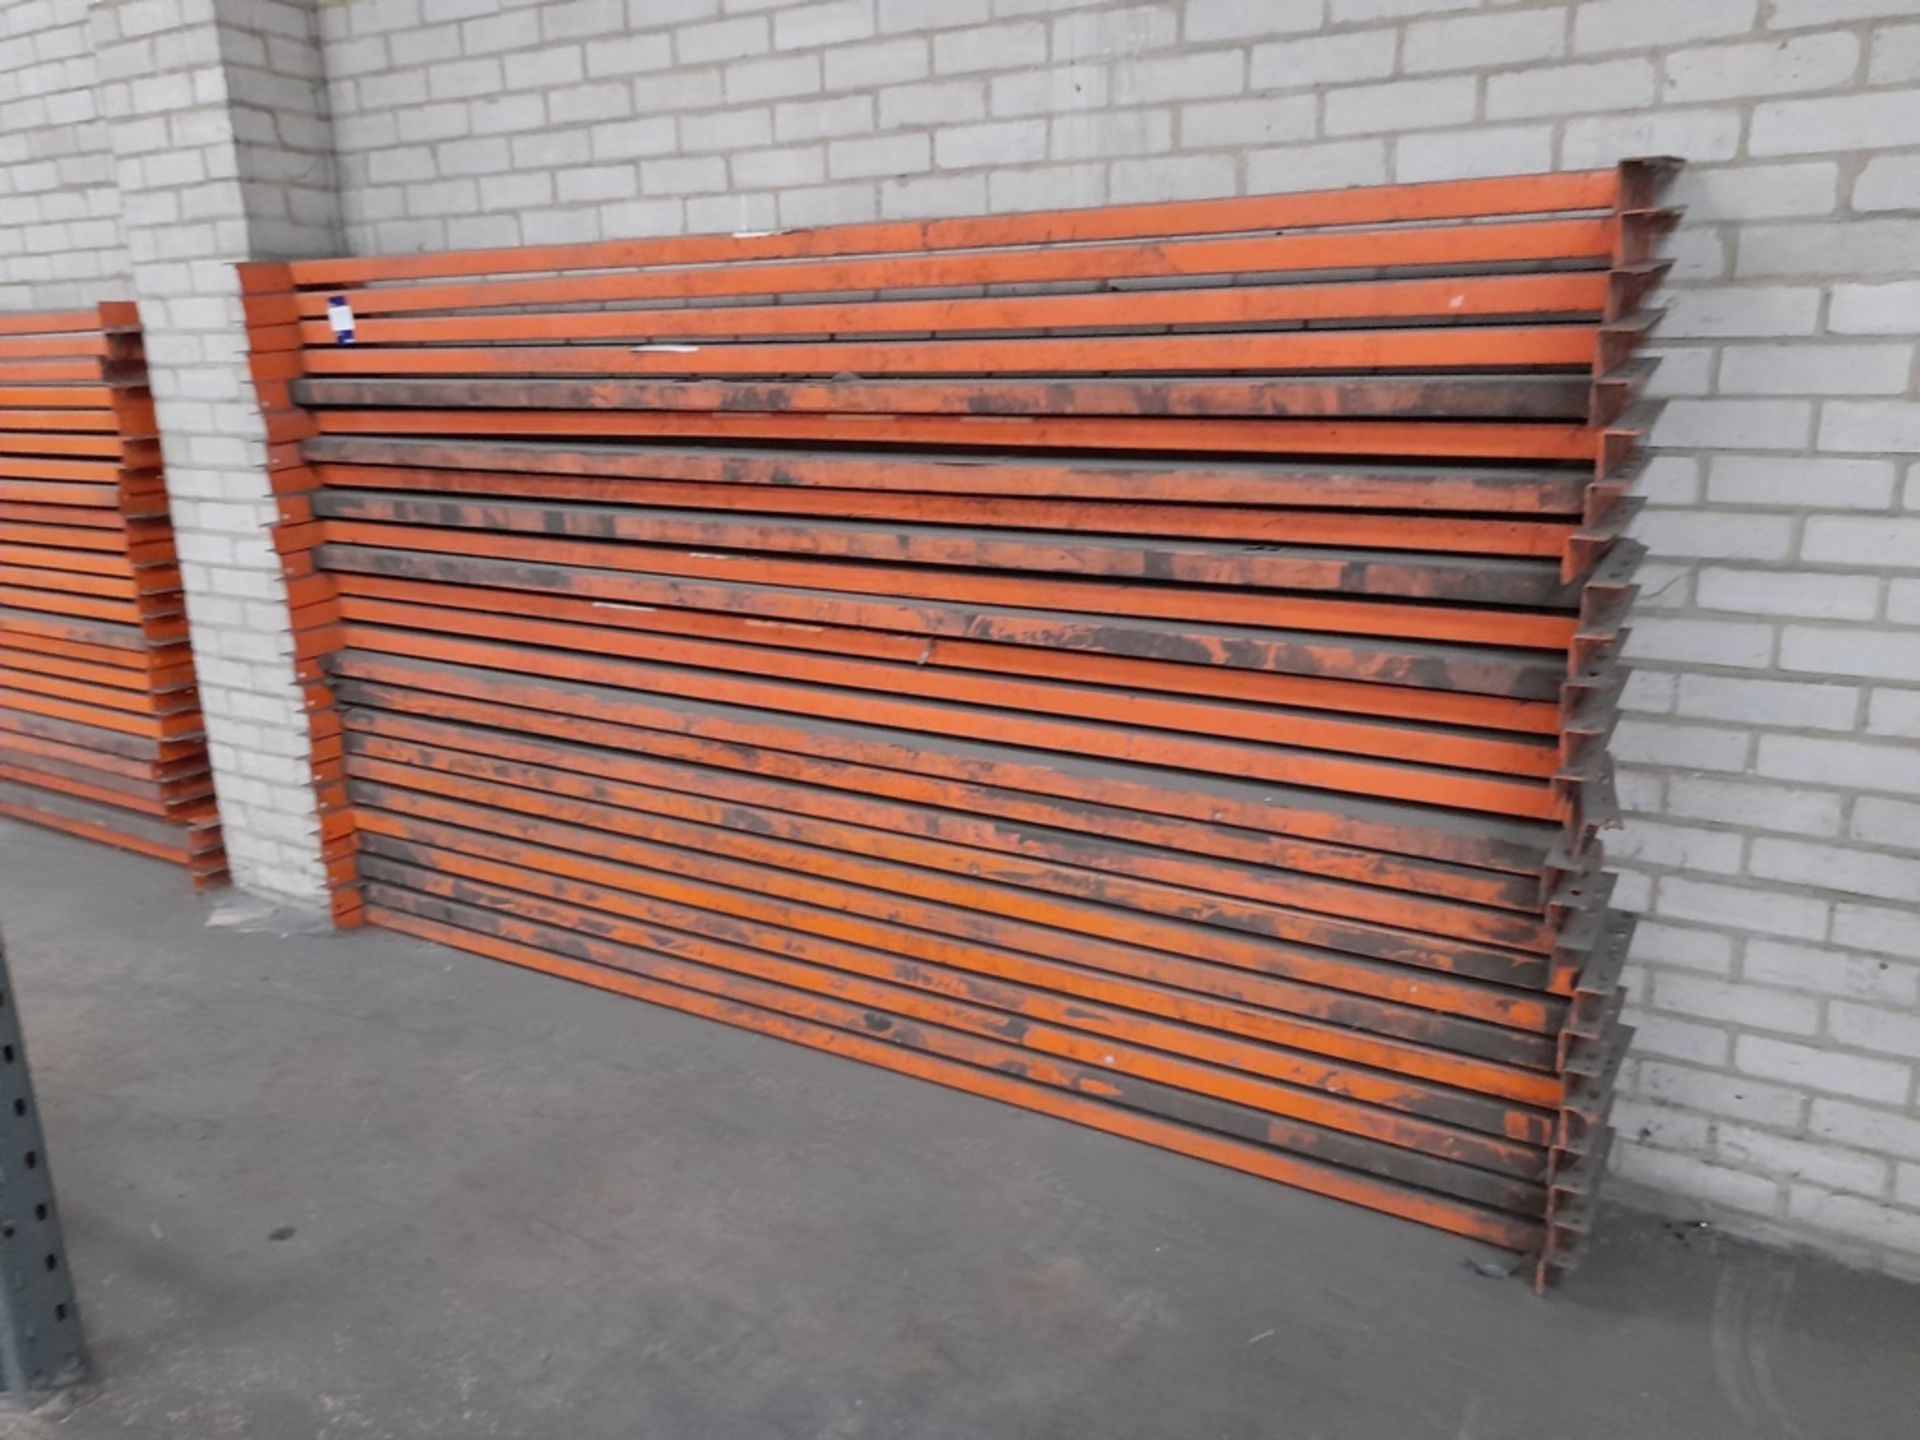 24 bays of DEXION industrial pallet racking, heigh - Image 8 of 8